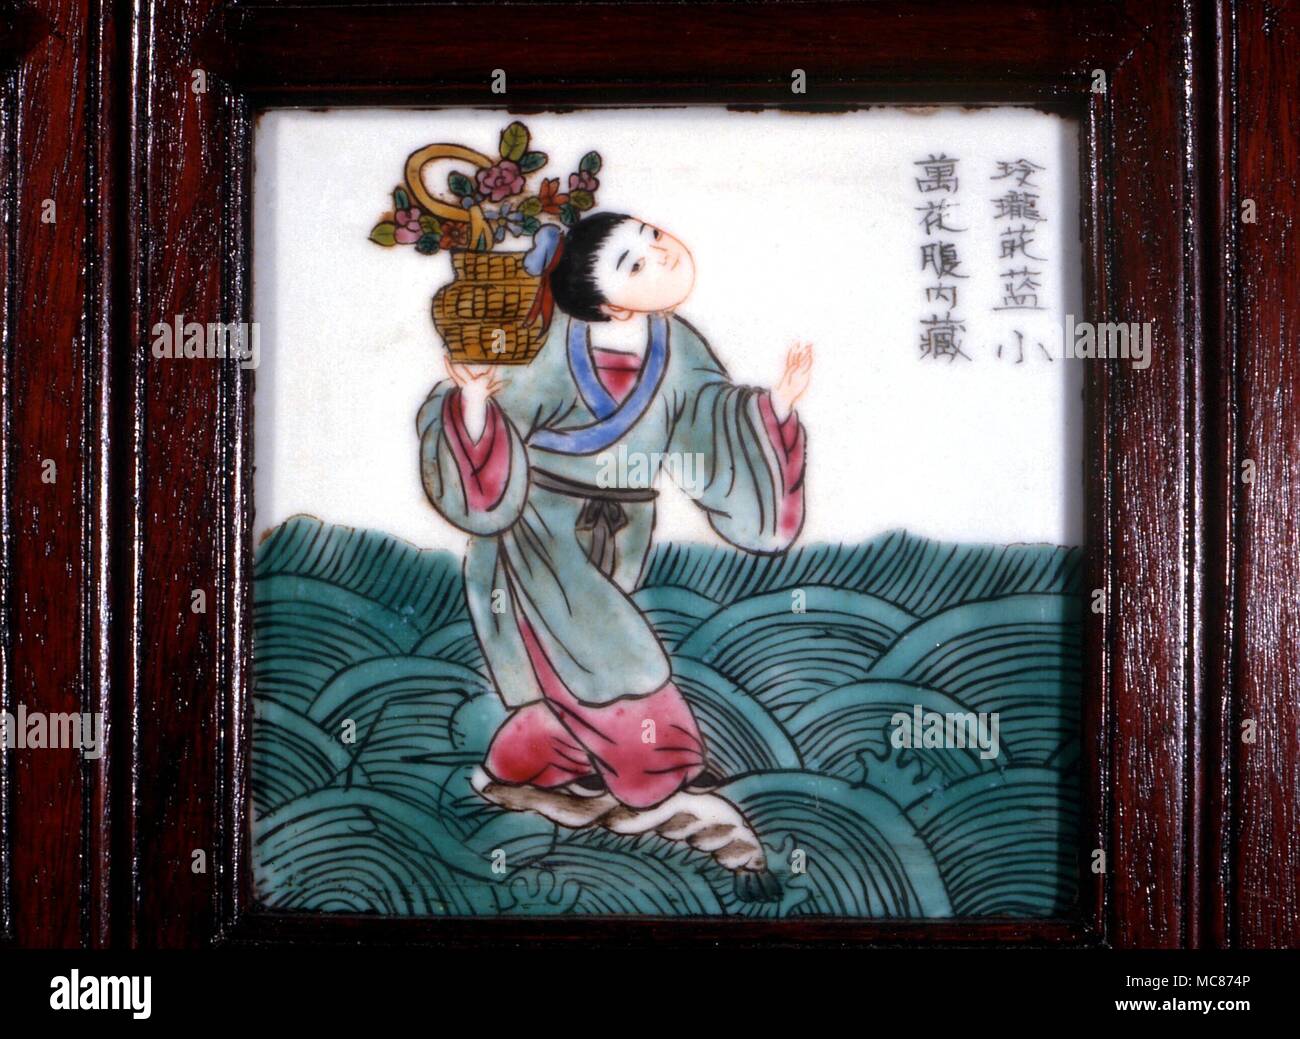 Taoism - One of the Taoist 'Eight Immortals- (Pa Hsien). Lan Ts'ai Ho, with her emblem of the flower basket (Patron of Florists). Mid-19th century Chinese tile, from screen Stock Photo